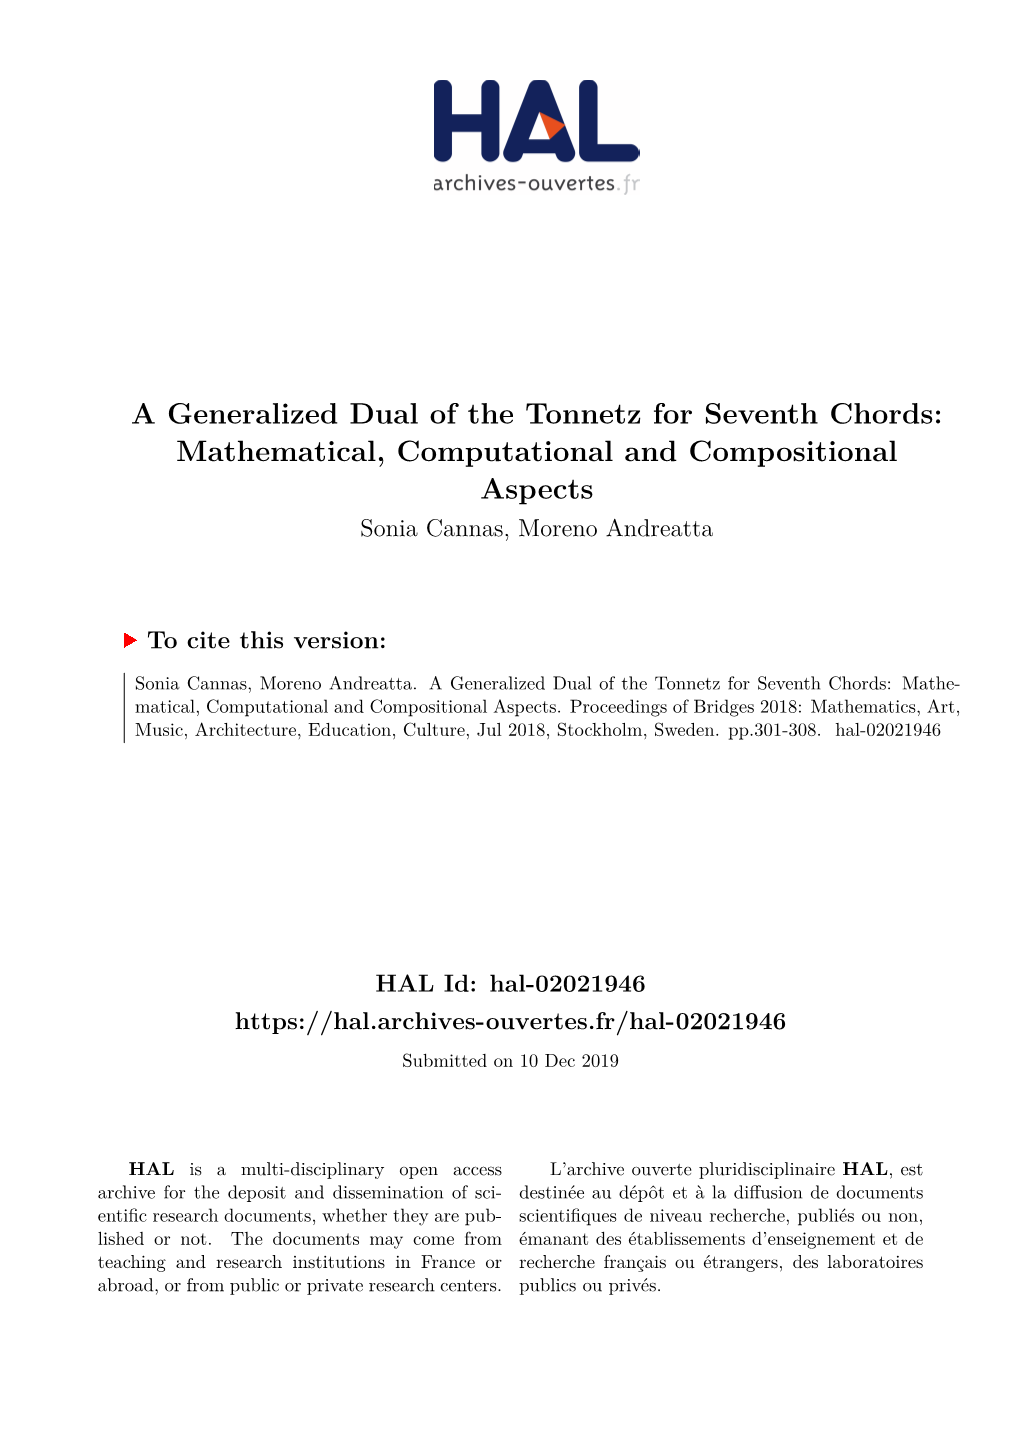 A Generalized Dual of the Tonnetz for Seventh Chords: Mathematical, Computational and Compositional Aspects Sonia Cannas, Moreno Andreatta